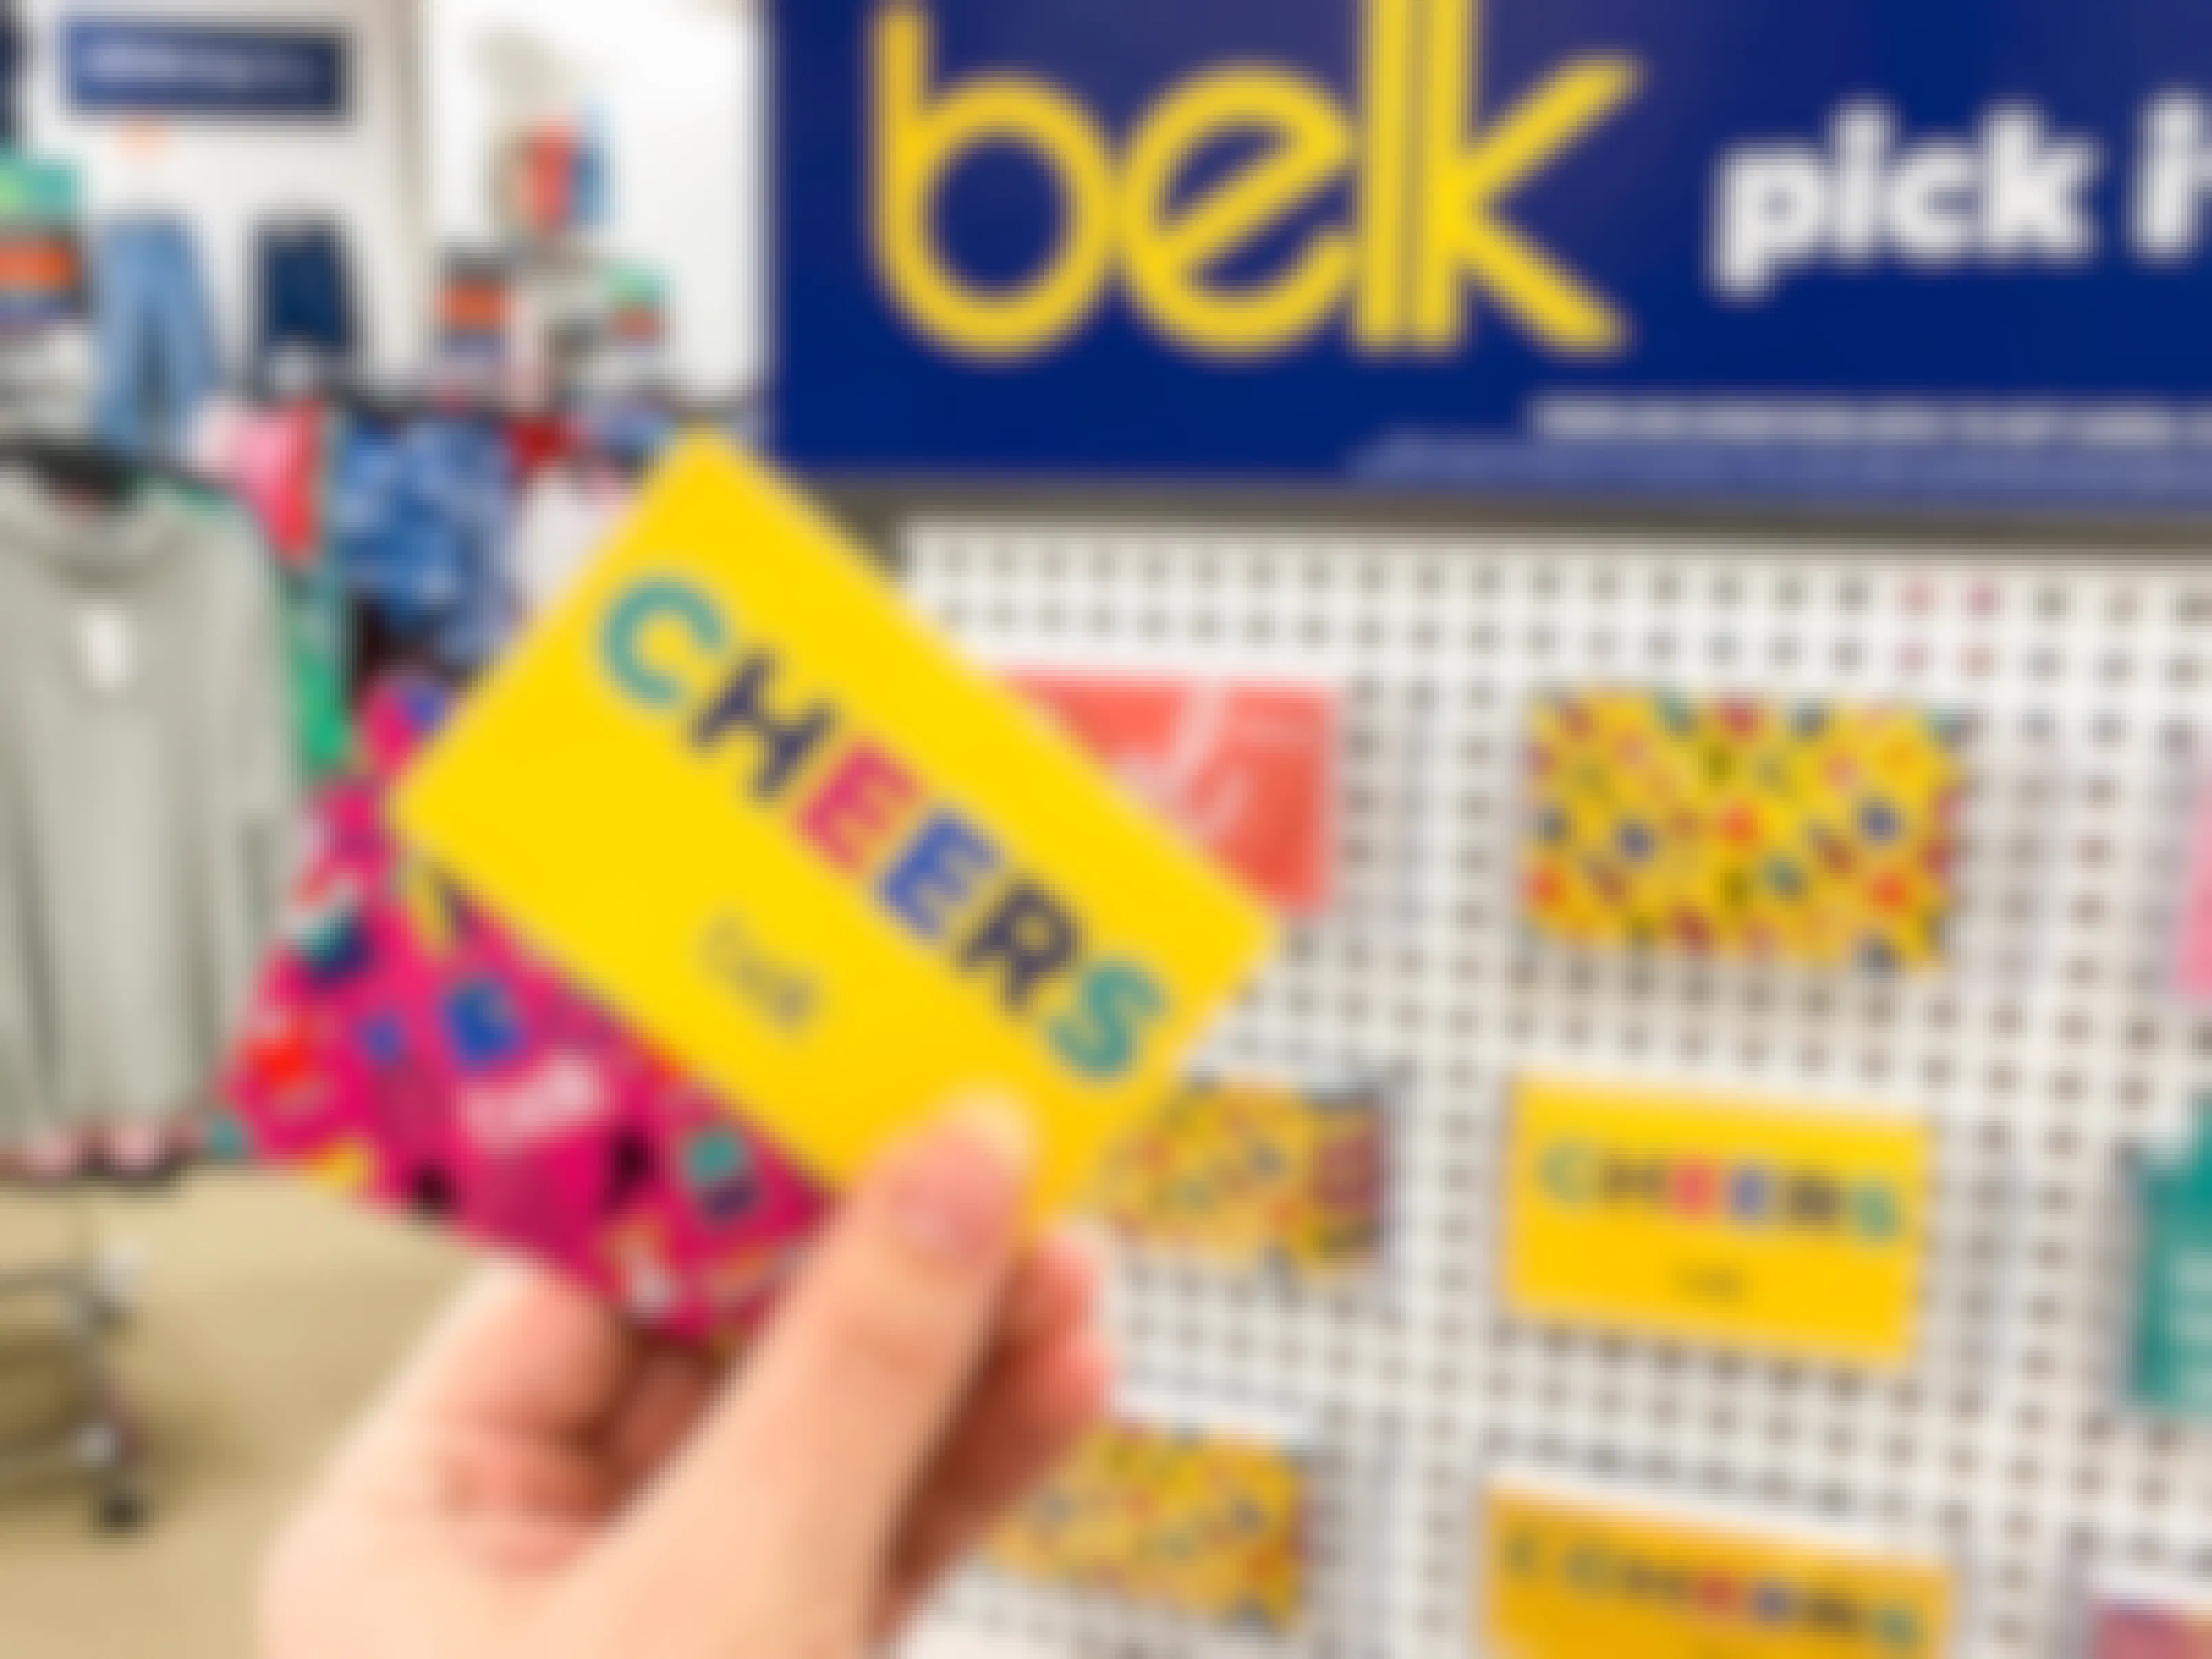 A person's hand holding some Belk gift cards in front of a display of gift cards inside Belk.